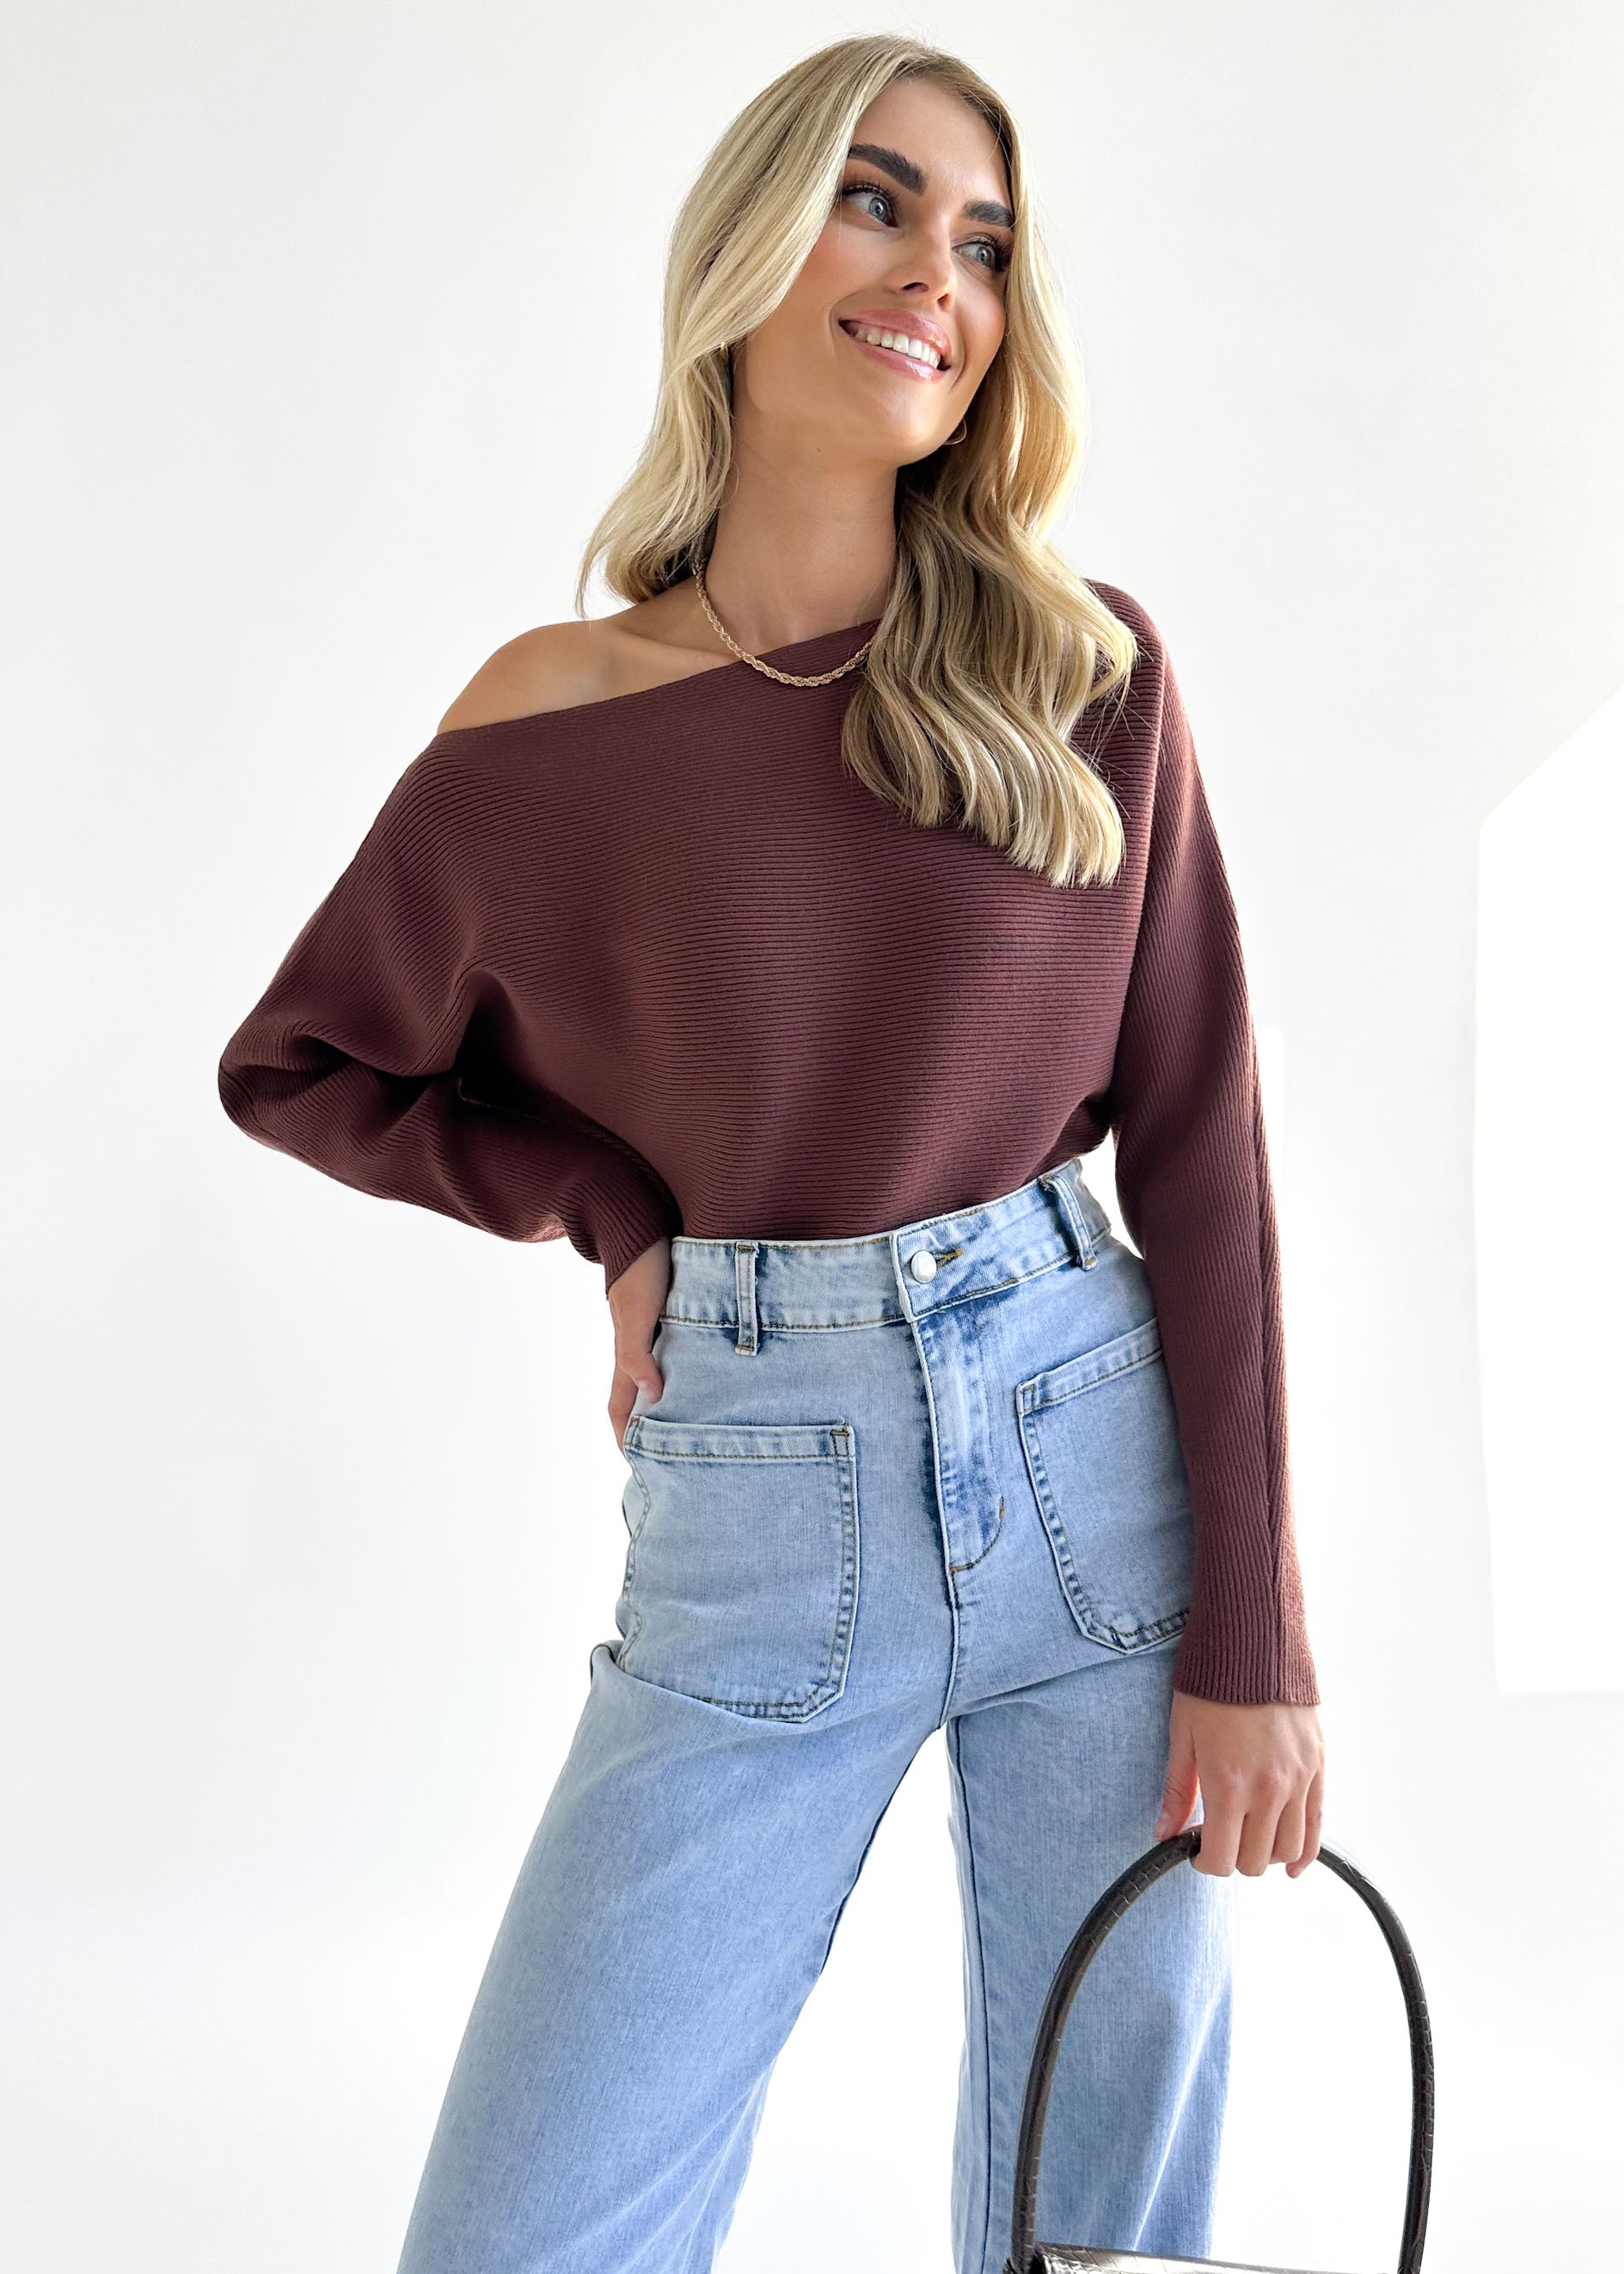 Bloome Knit Top - Chocolate